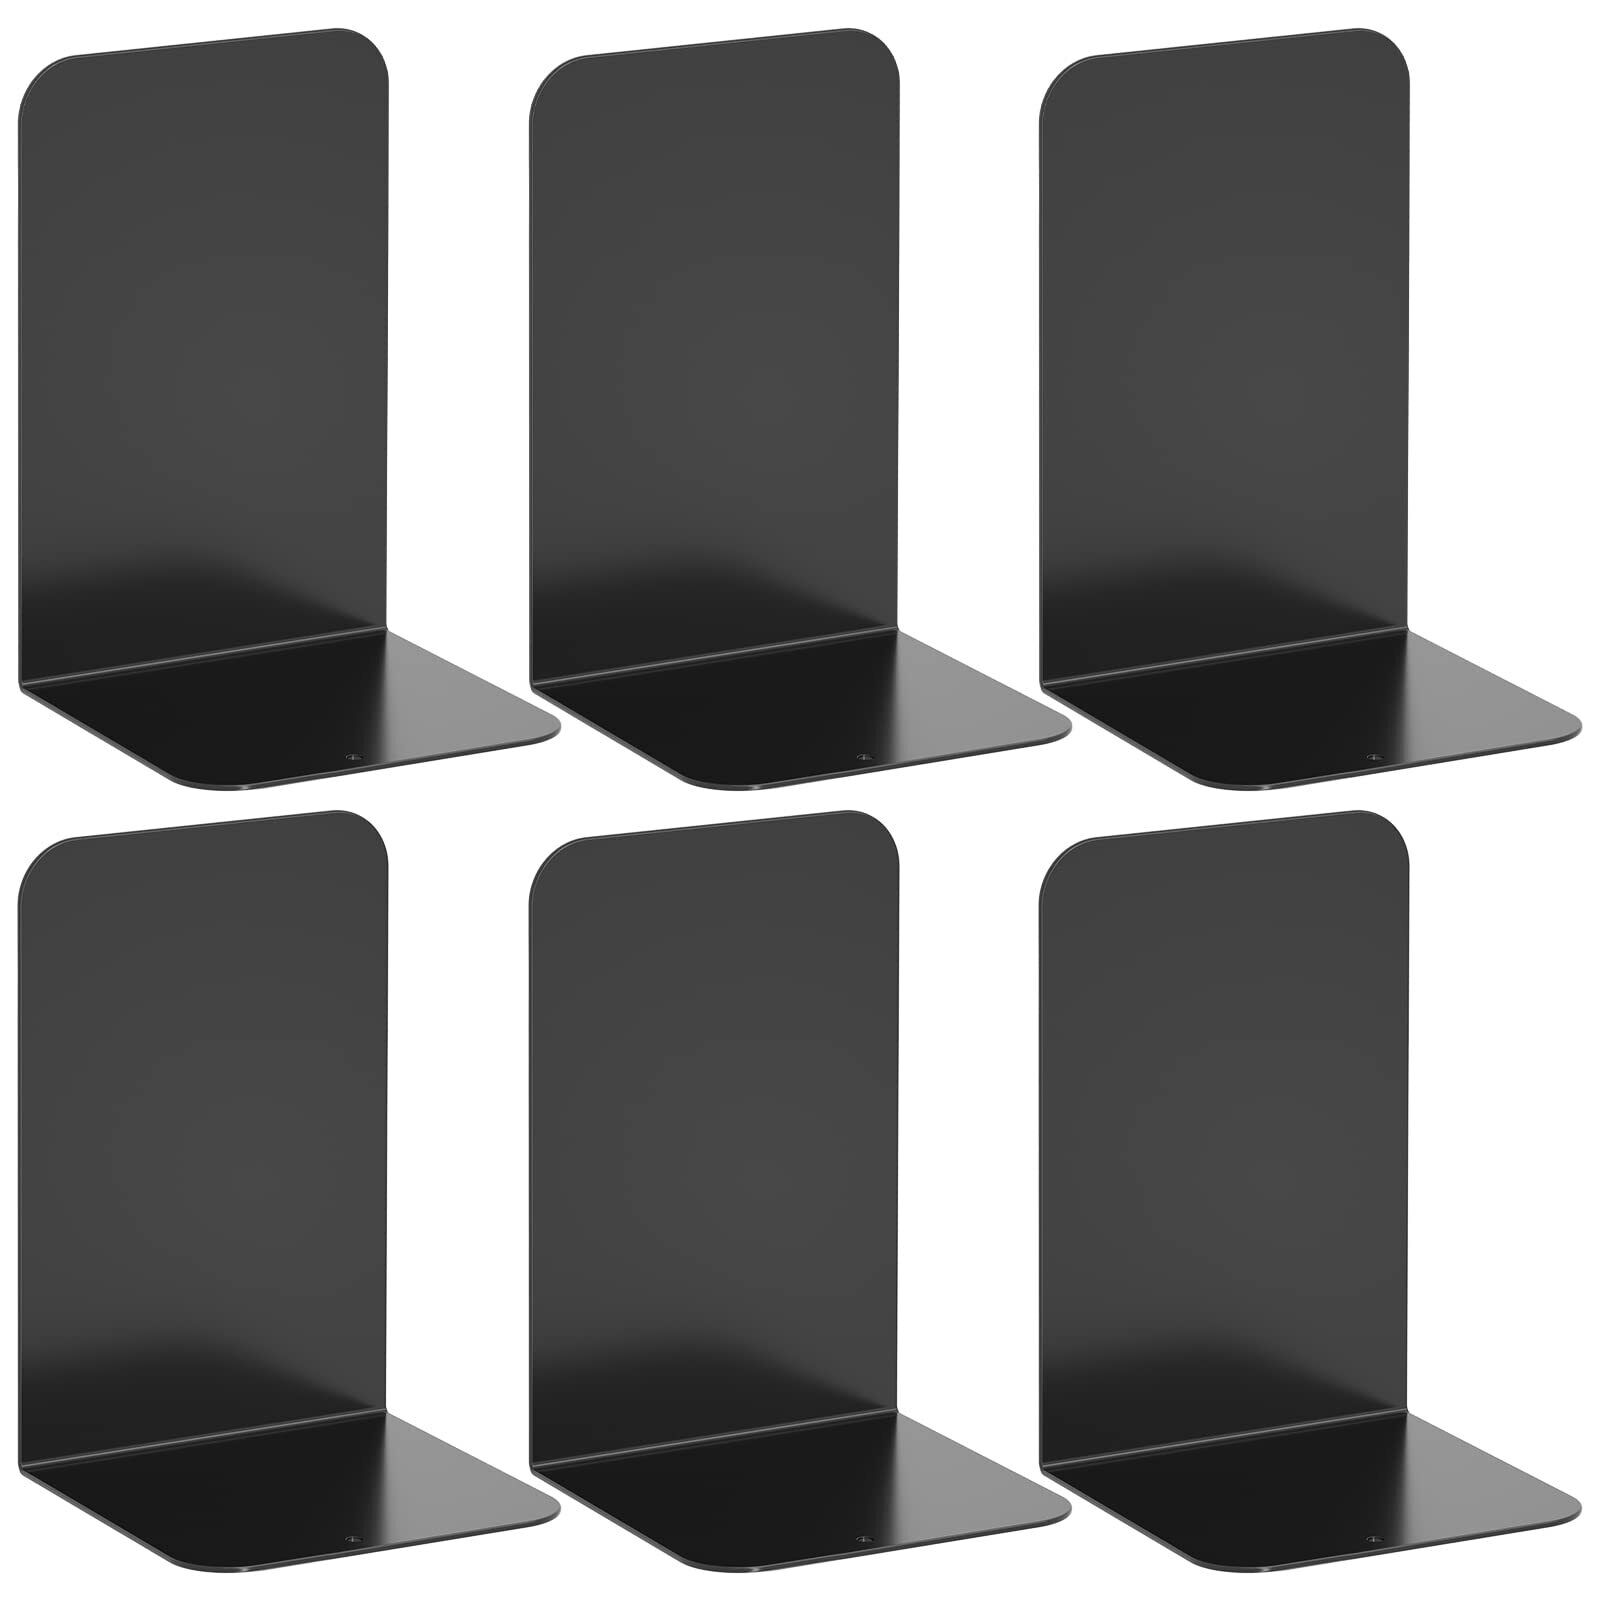 Bookend, Black Metal Book Ends, Book Ends for Shelves Heavy Duty Bookends, Bo...